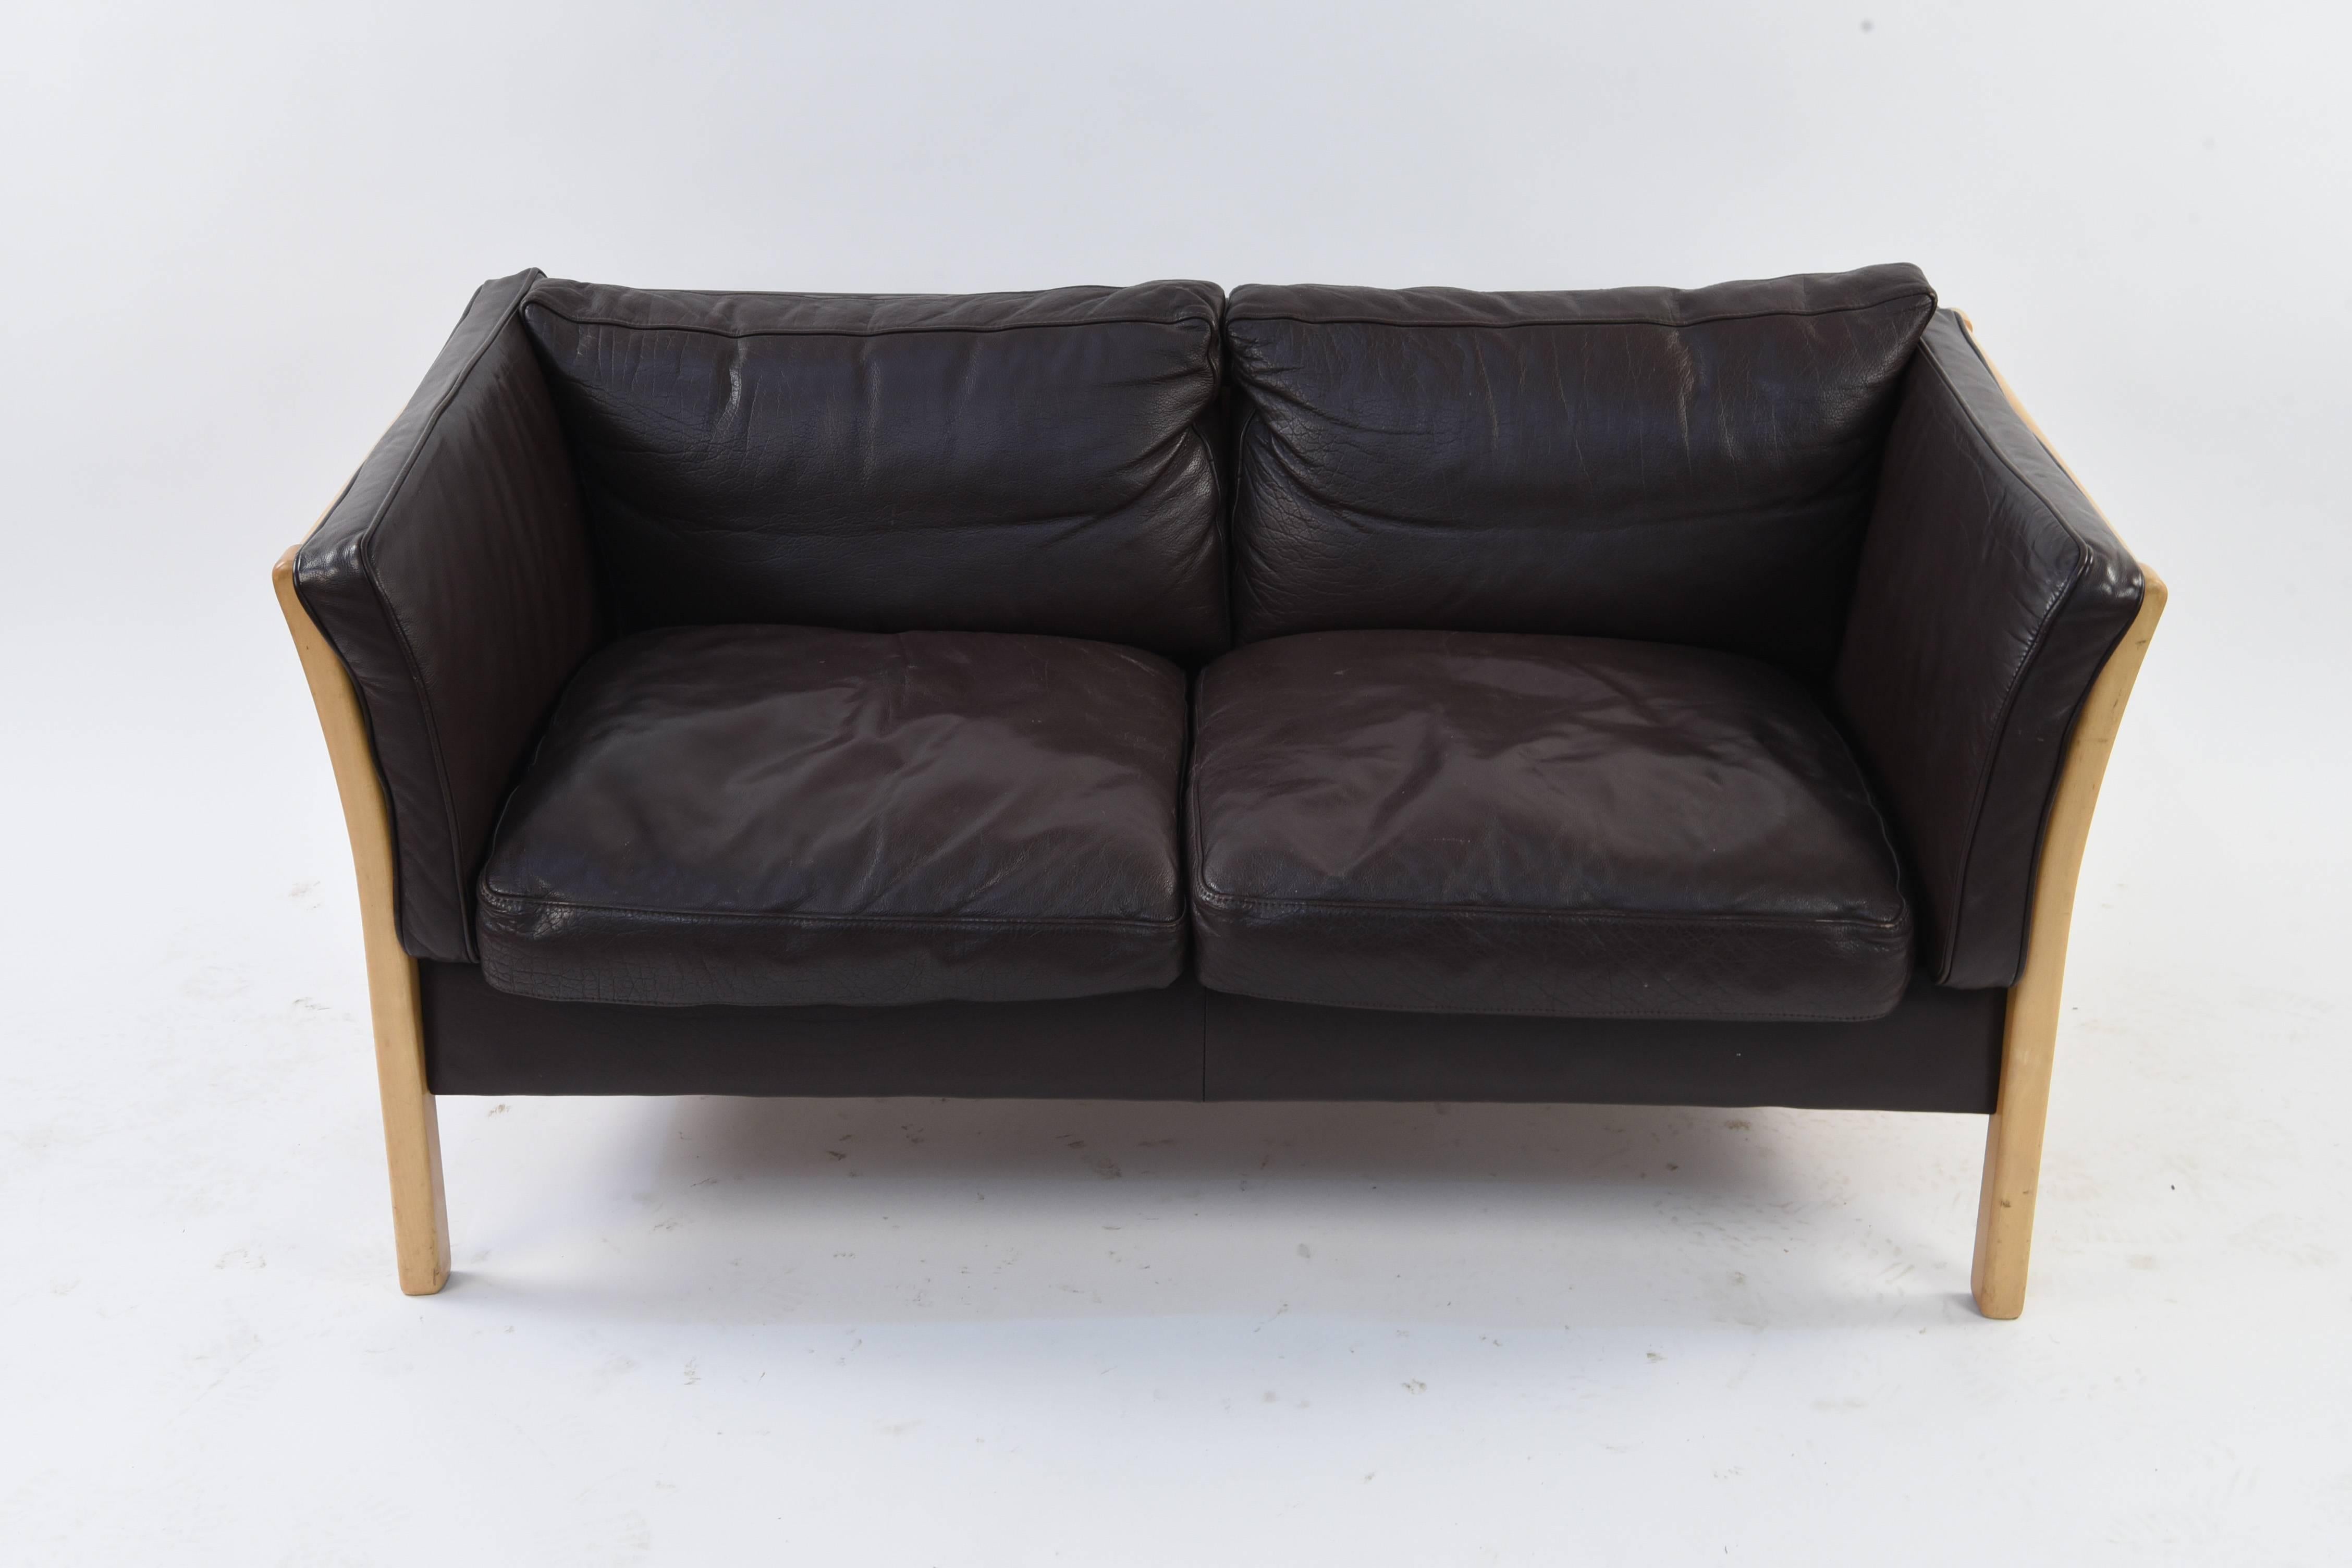 This two-seat sofa or loveseat features beech wood with leather upholstery. Great Danish midcentury look.